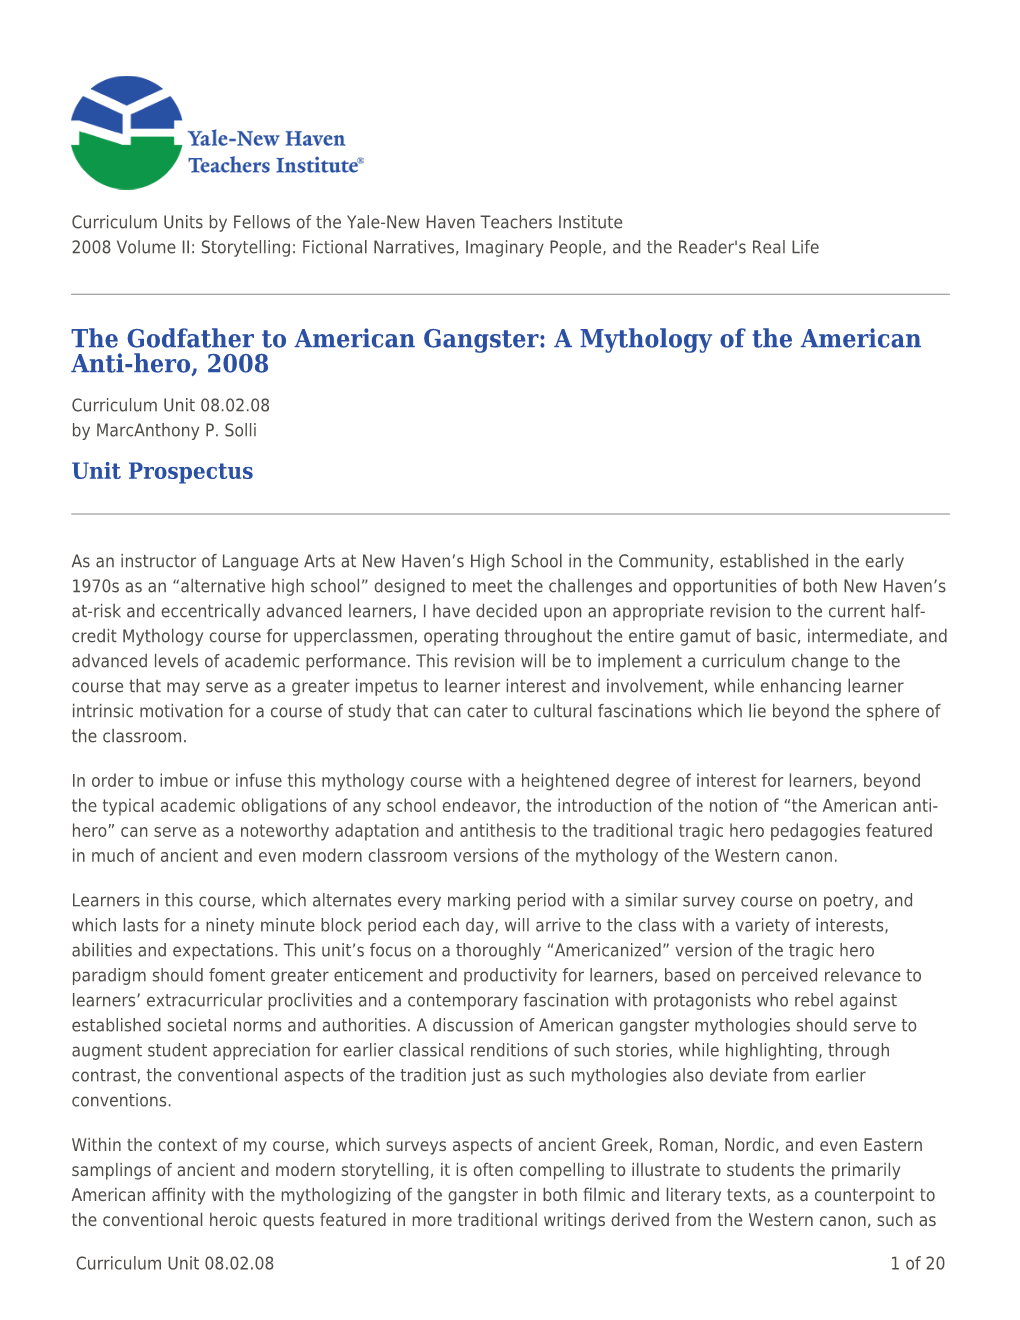 The Godfather to American Gangster: a Mythology of the American Anti-Hero, 2008